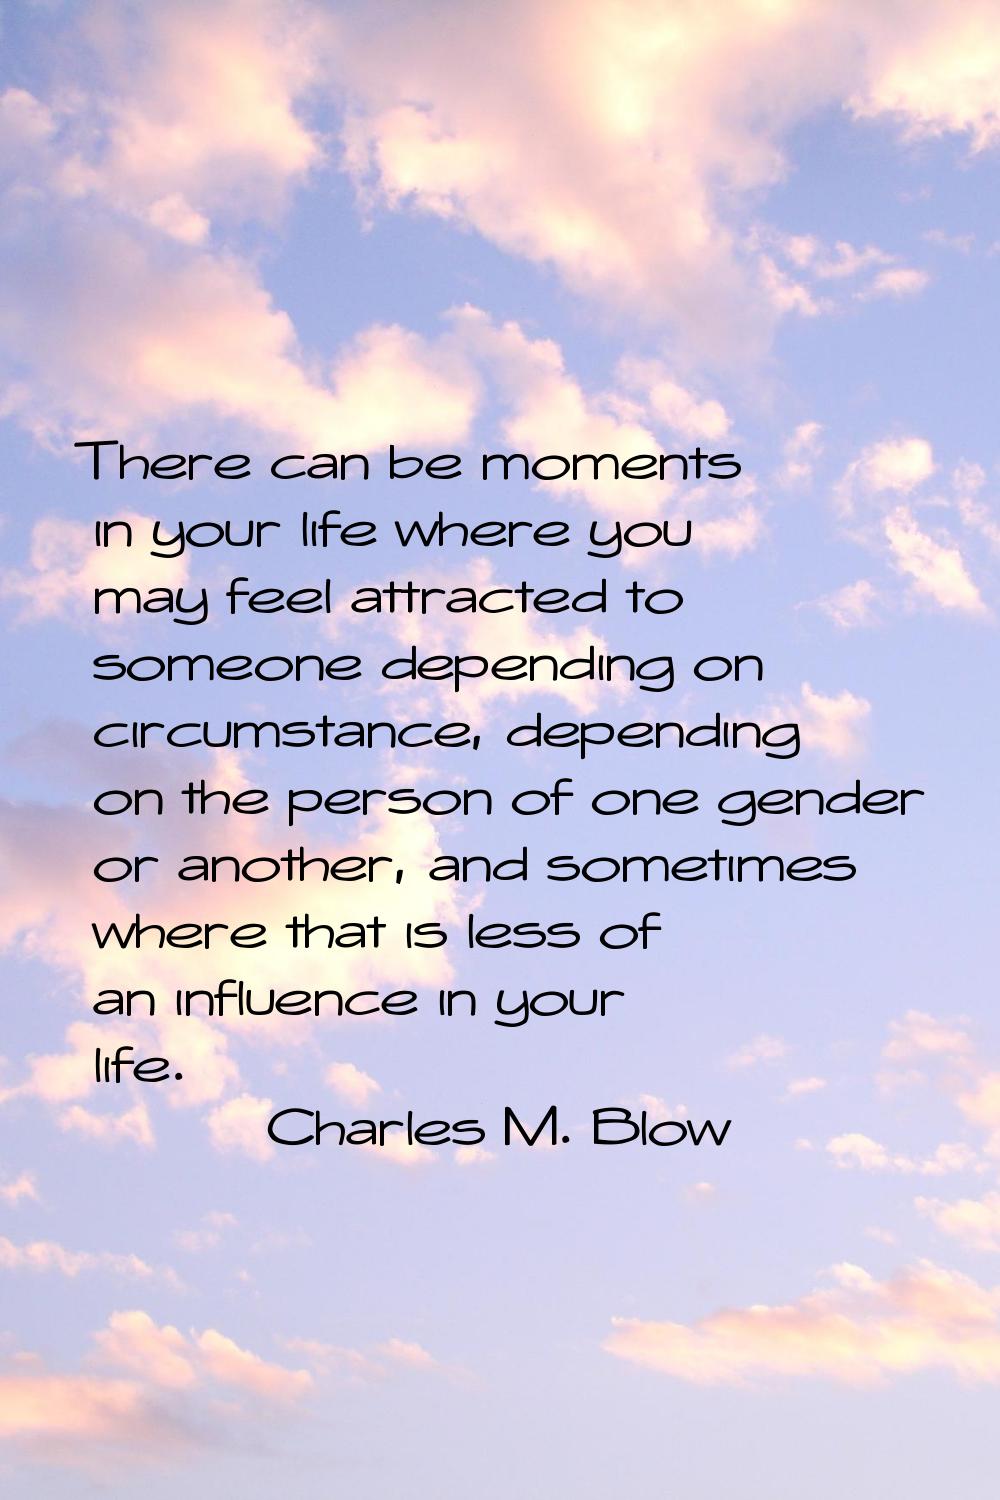 There can be moments in your life where you may feel attracted to someone depending on circumstance